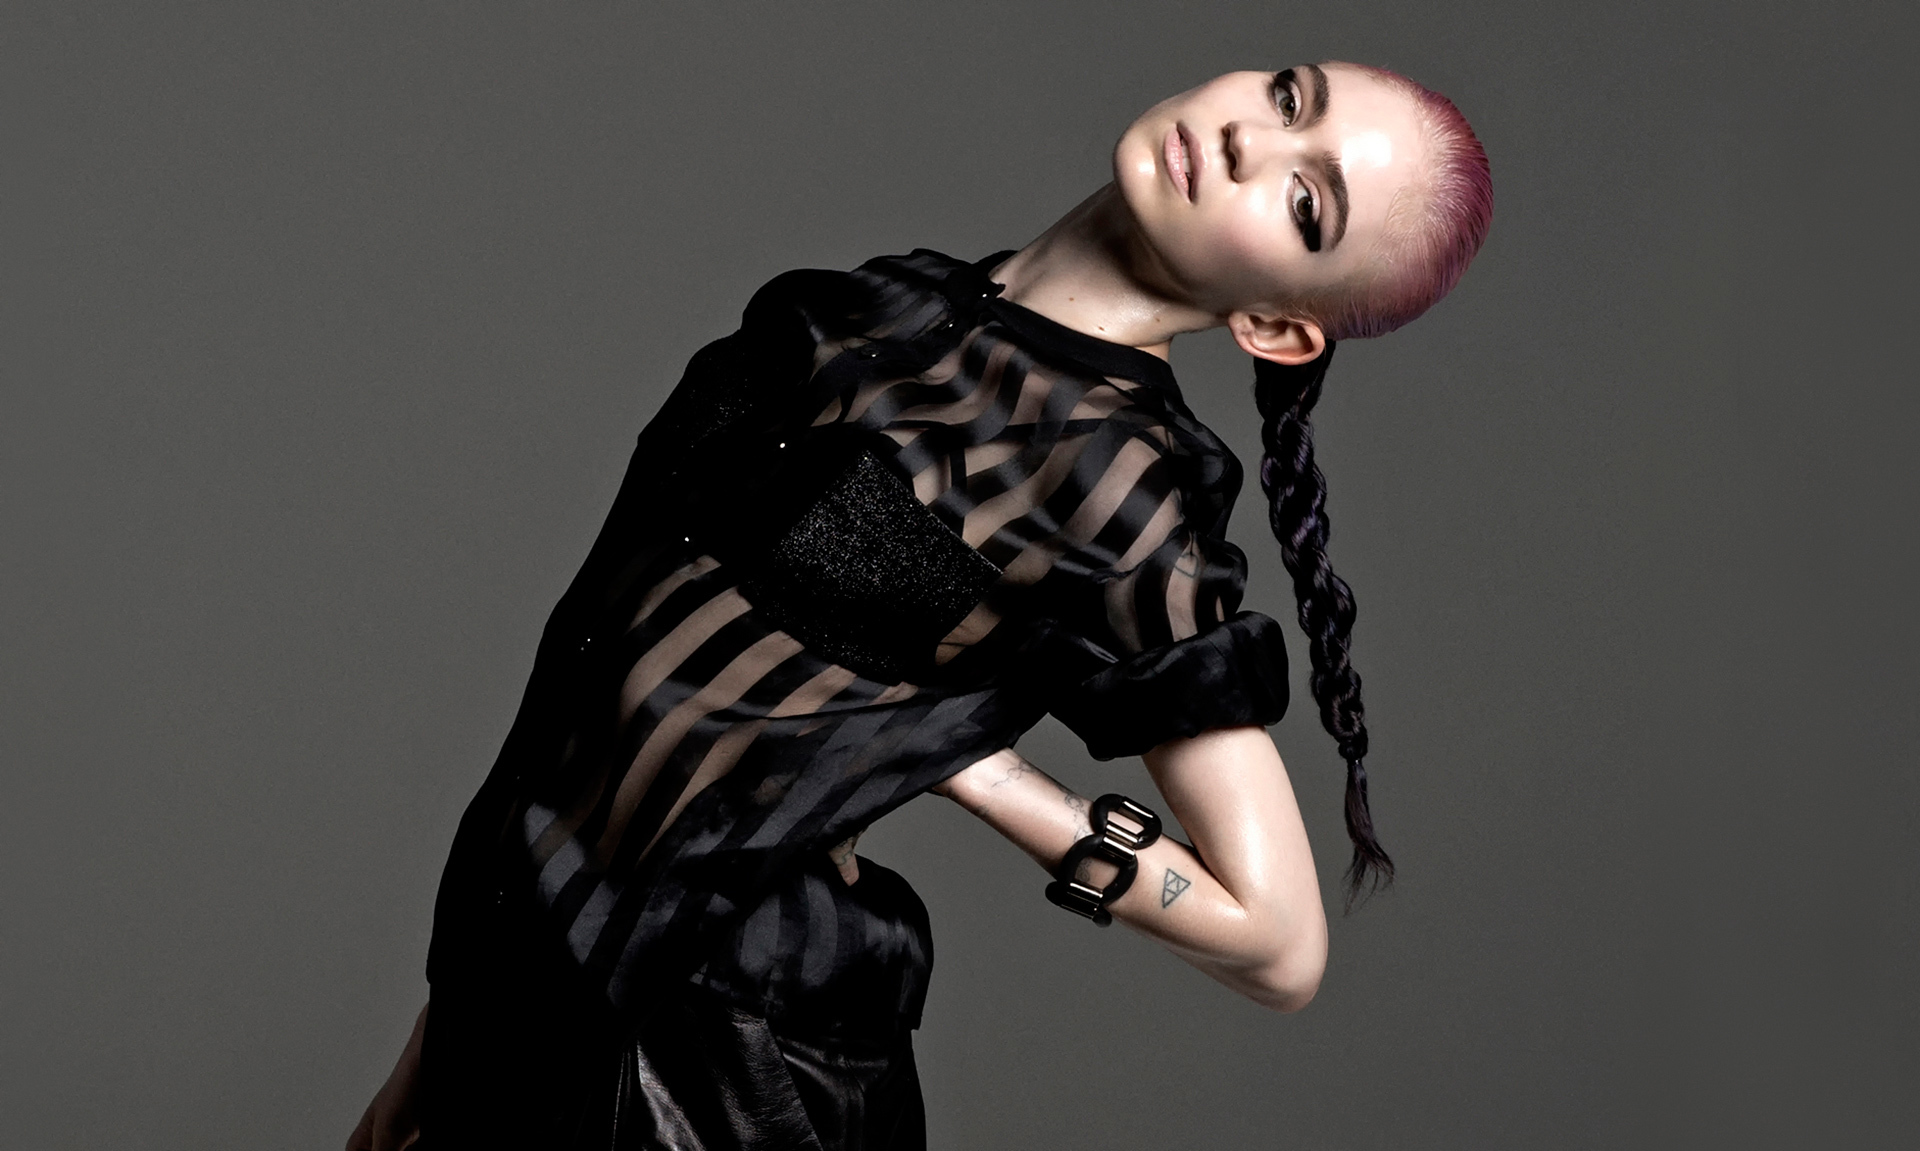 Women Young Woman Musician Black Clothing Dyed Hair Pink Hair Ponytail Looking At Viewer Black Cloth 1920x1151